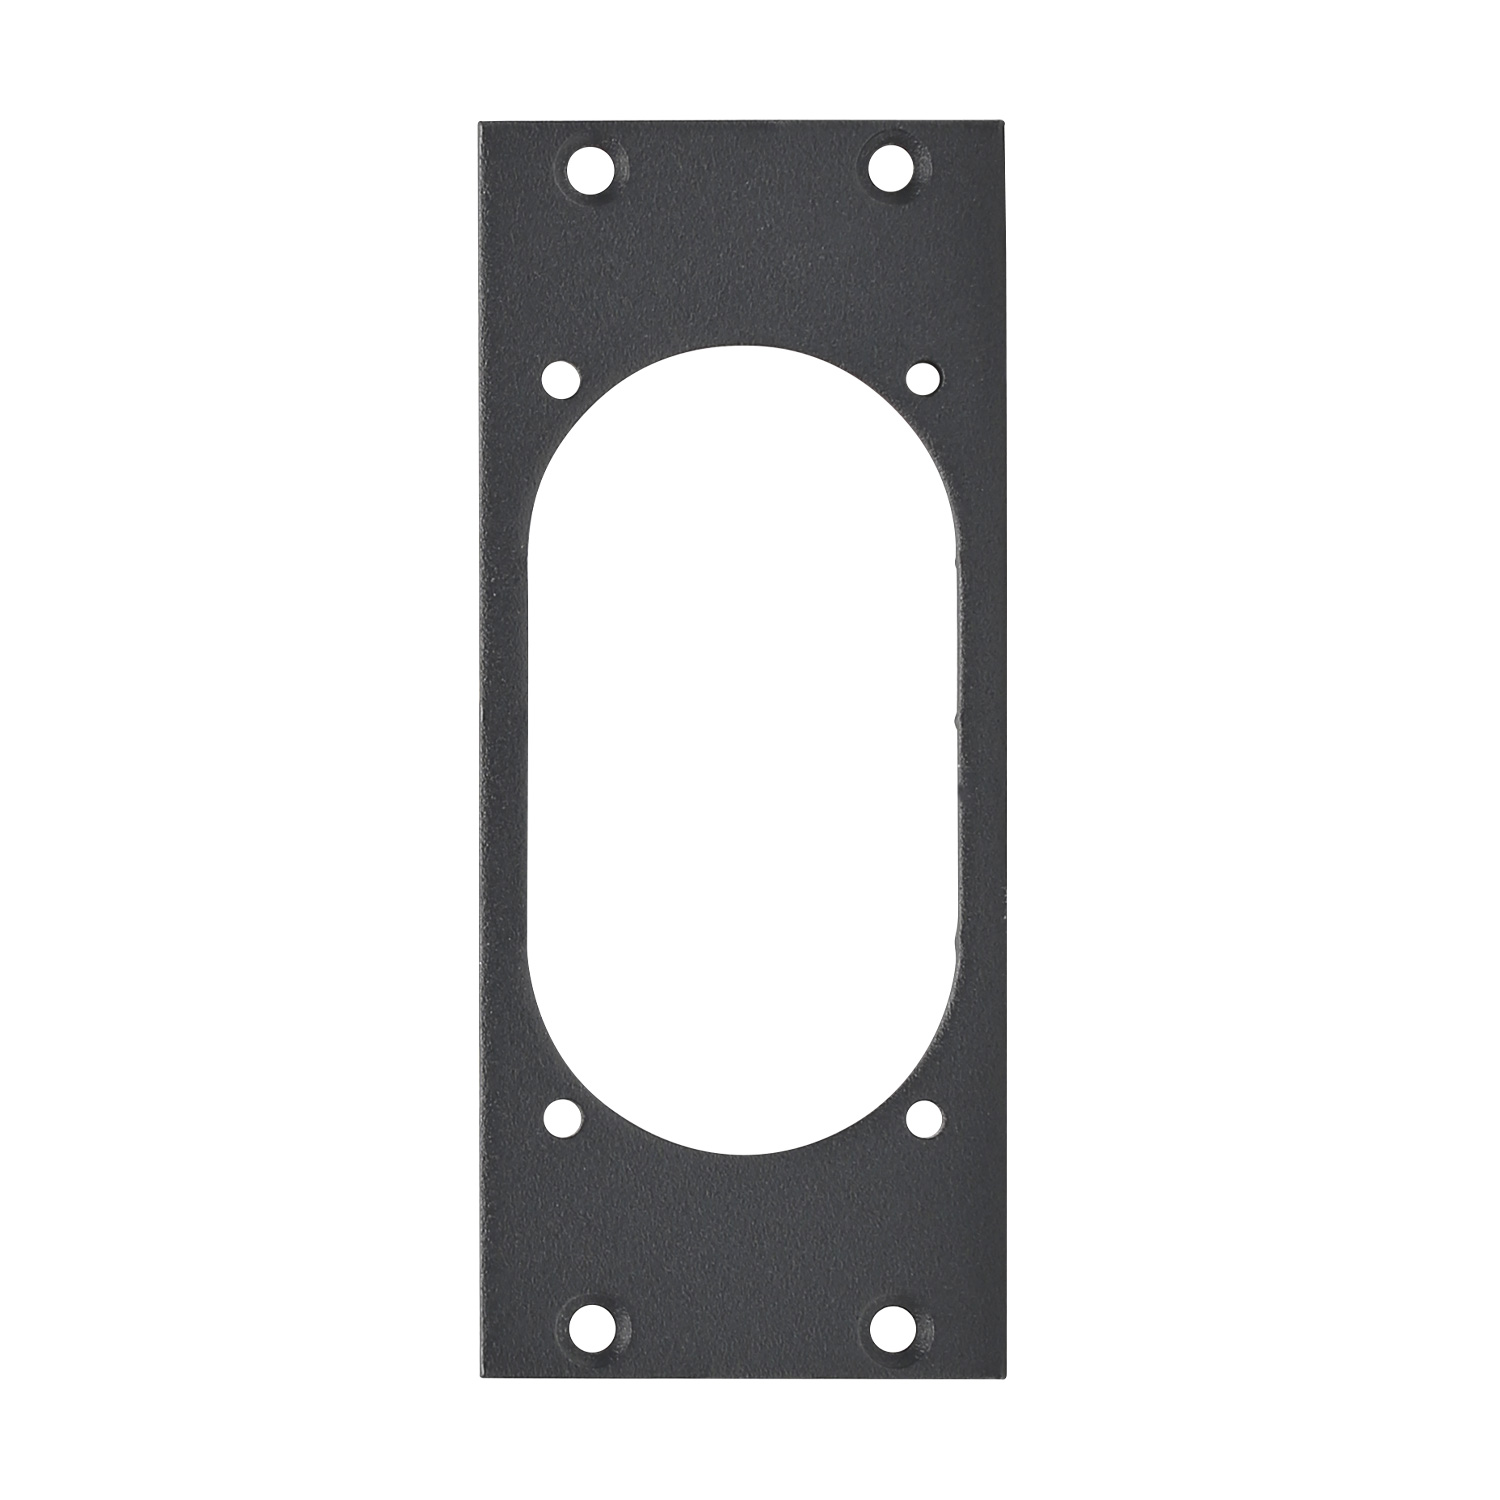 front panel 1 x NAC3PX, 2 HE, 1 BE for SYS-series, 2.5 mm galvanized steel sheet, colour: grey